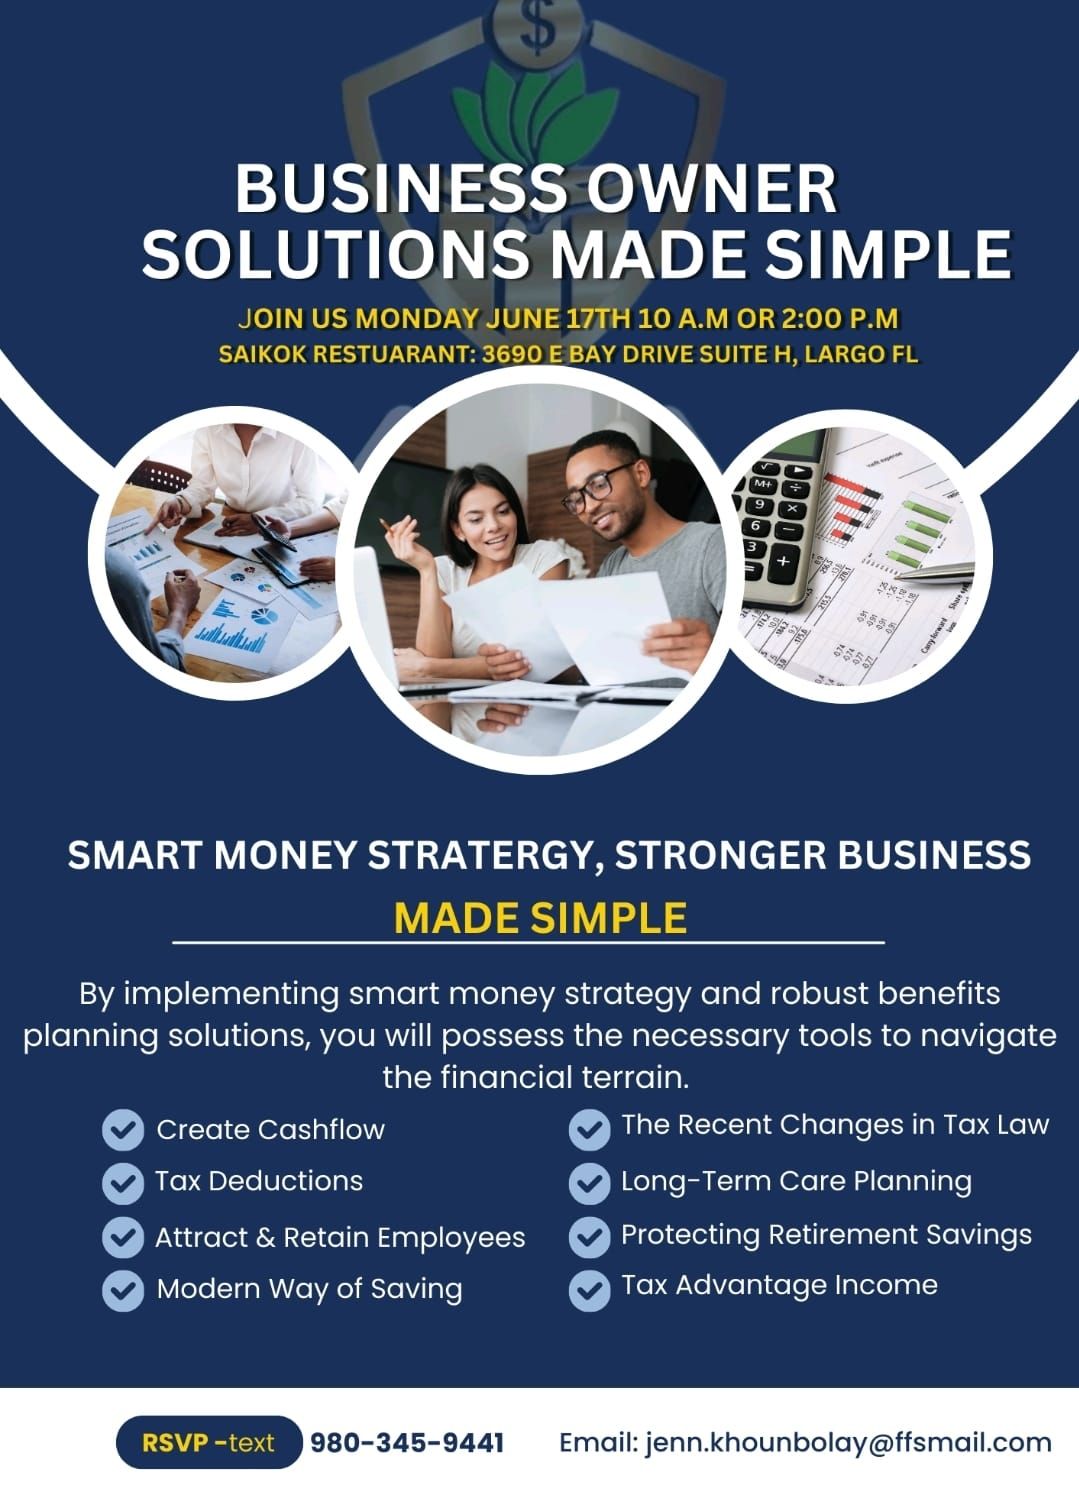 Business Owners Solutions 